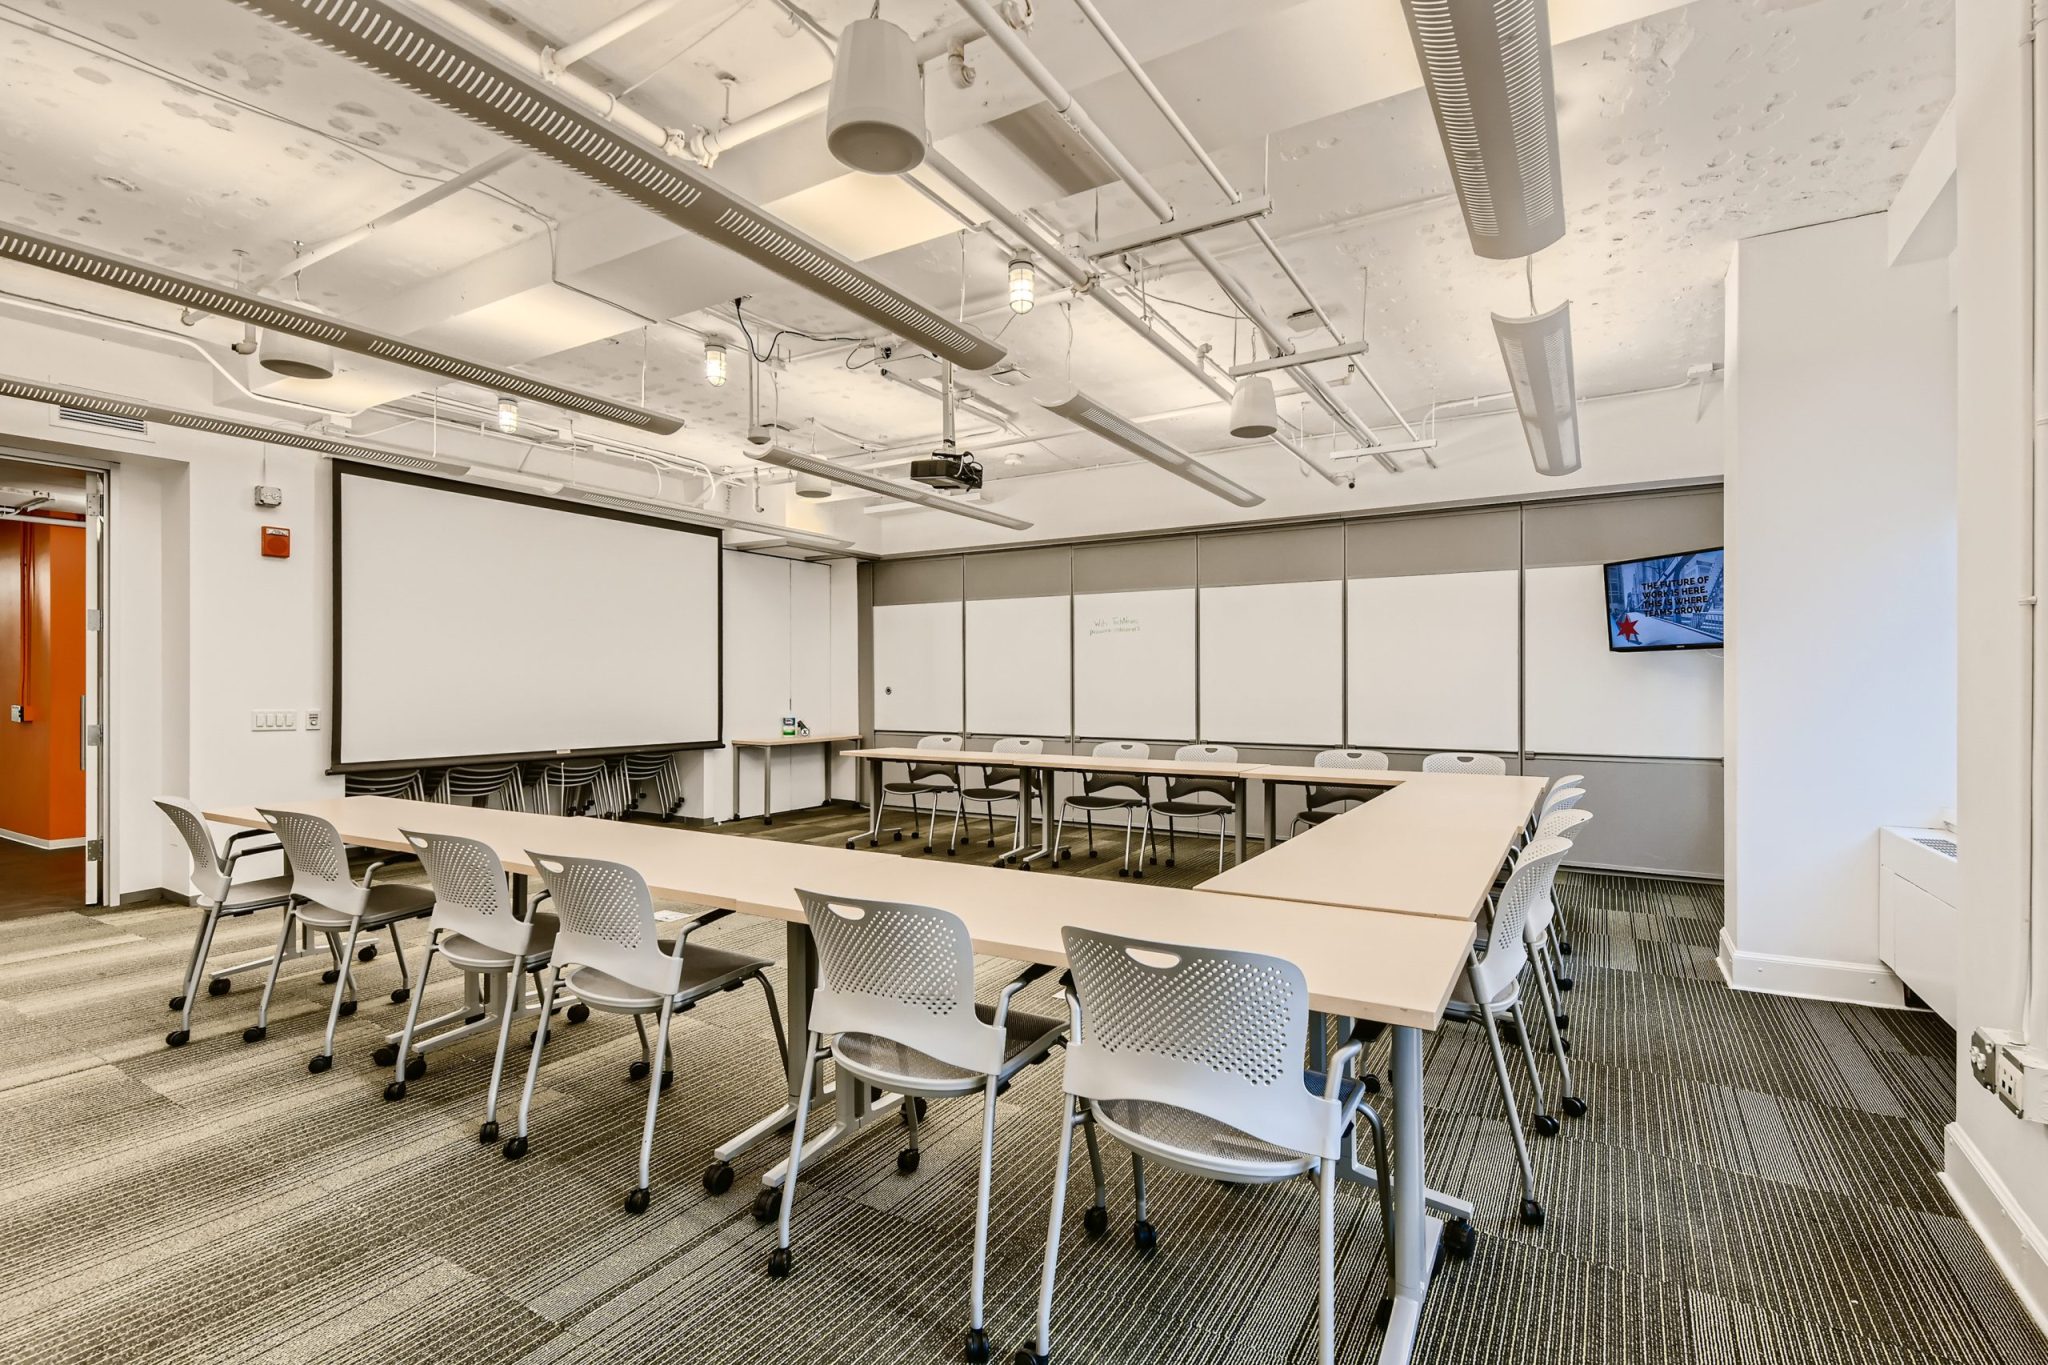 Conference Room C in the U-shape style